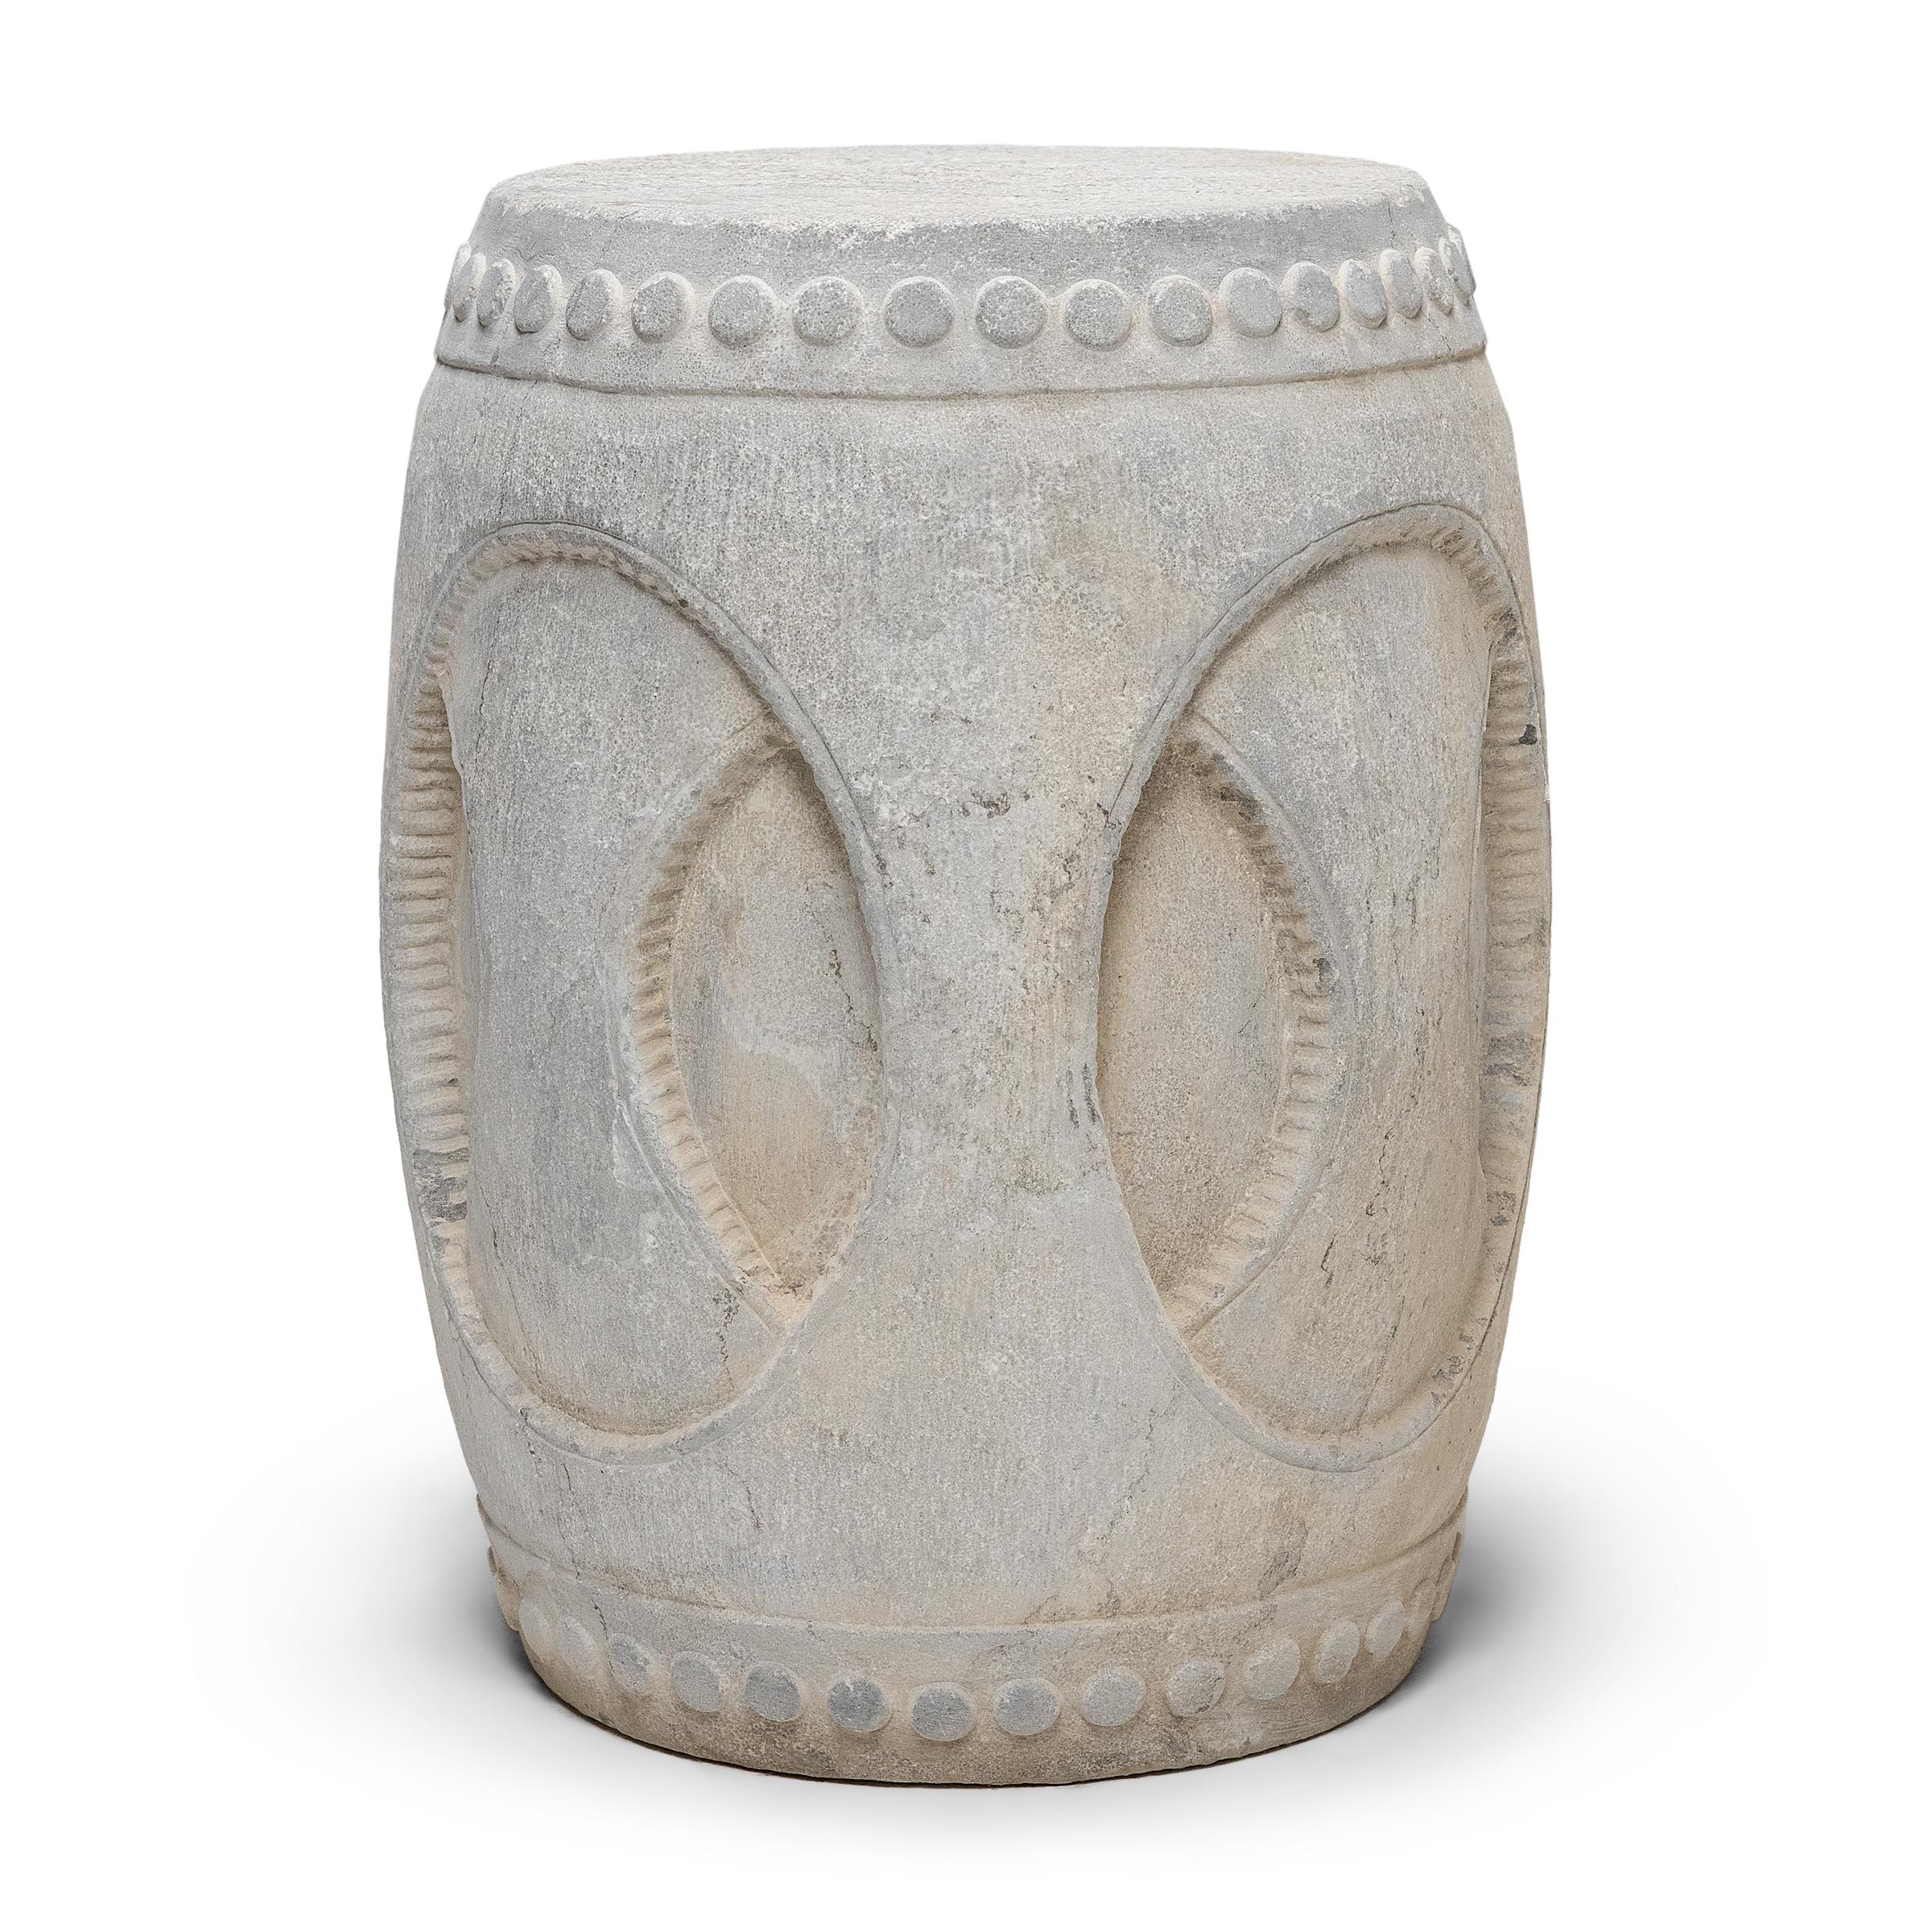 Drum-form stools such as these were traditionally used in gardens and outdoor pavilions where upper class scholars read, wrote, gathered for discussion and, in general, developed their inner sensibilities. This contemporary example was carved from